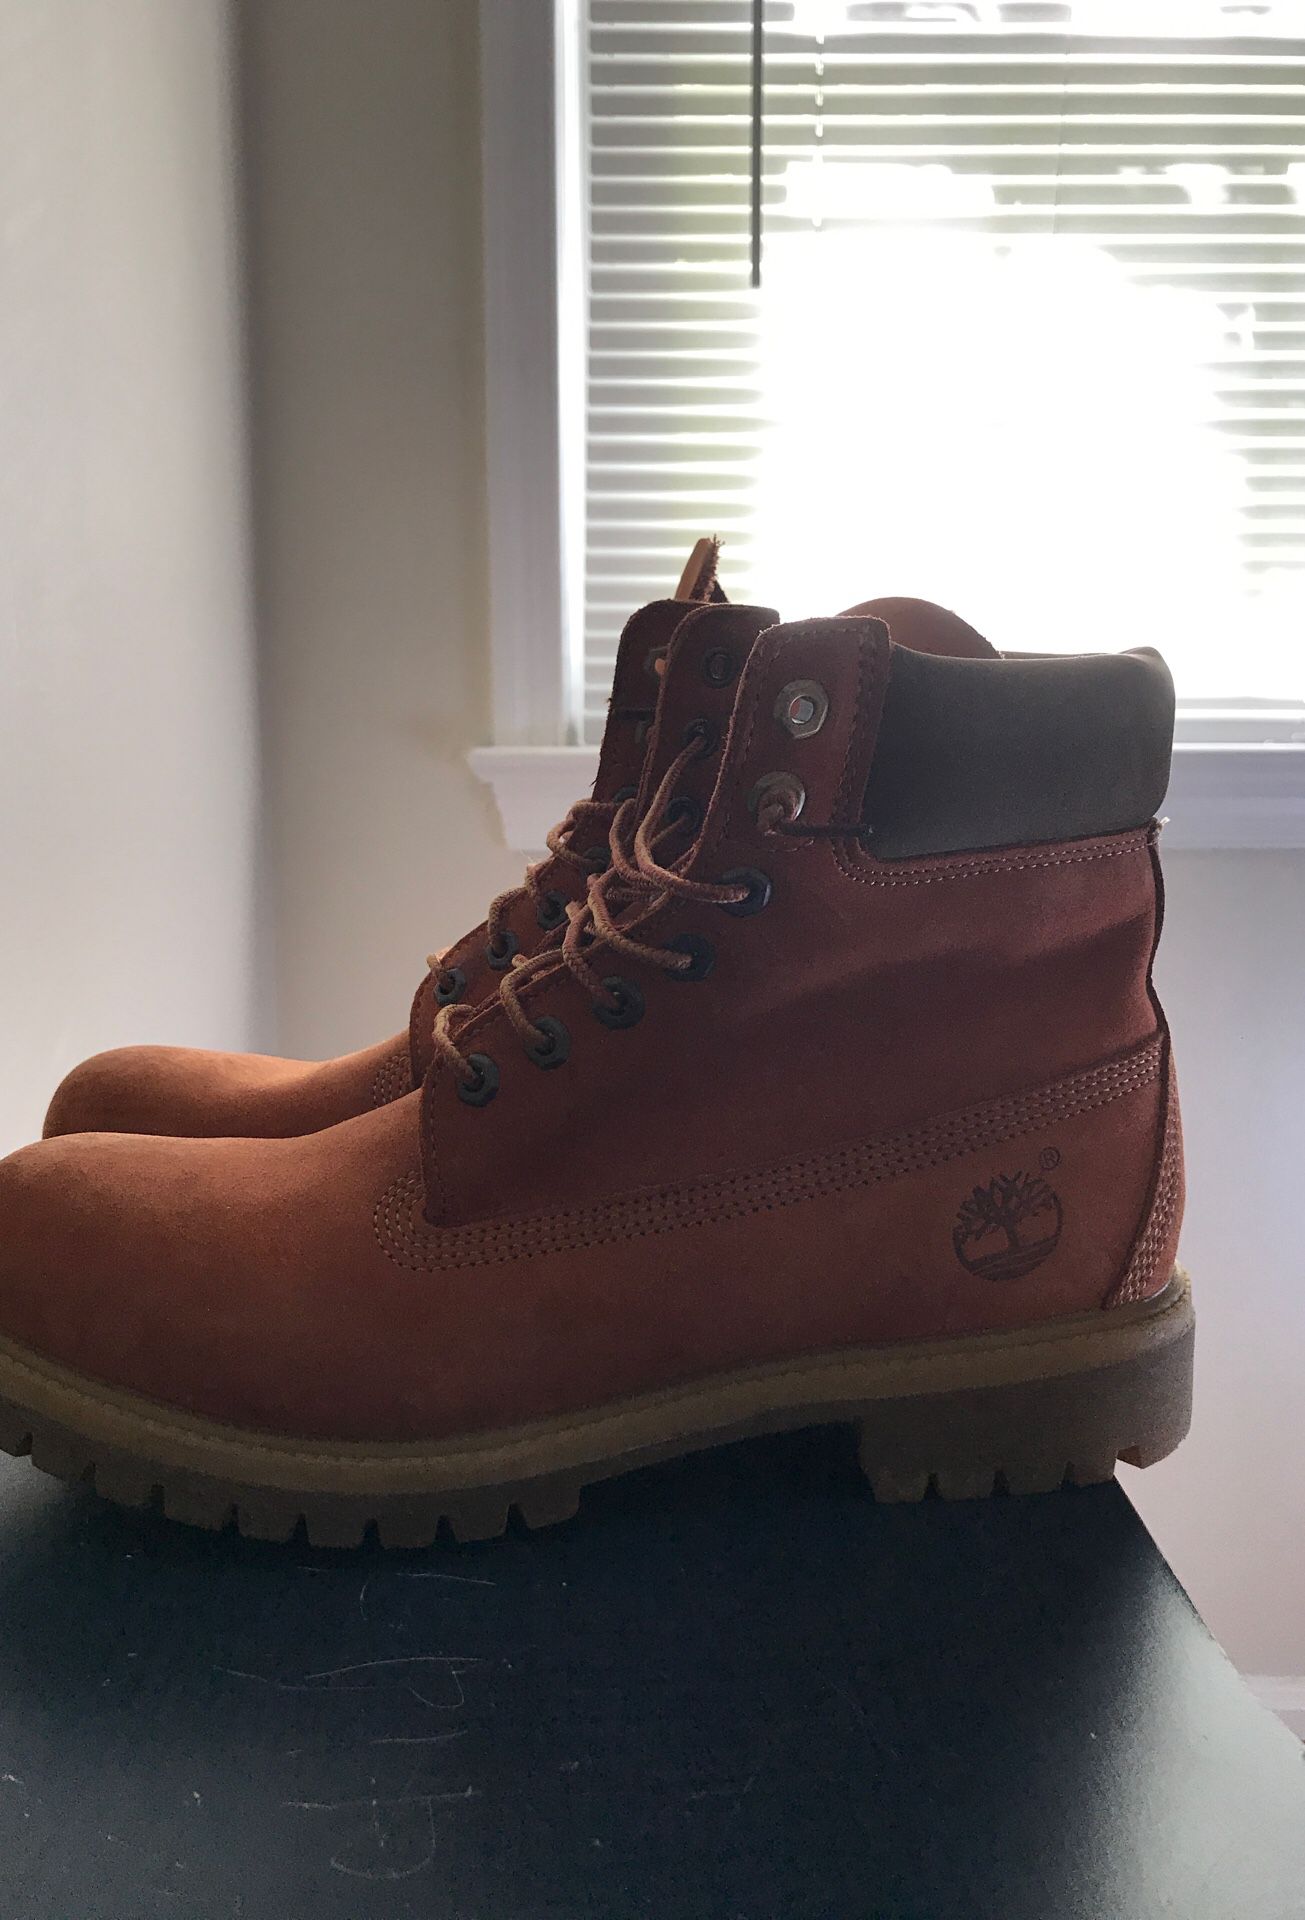 Timberlands 6 inch boots VNDS size 10